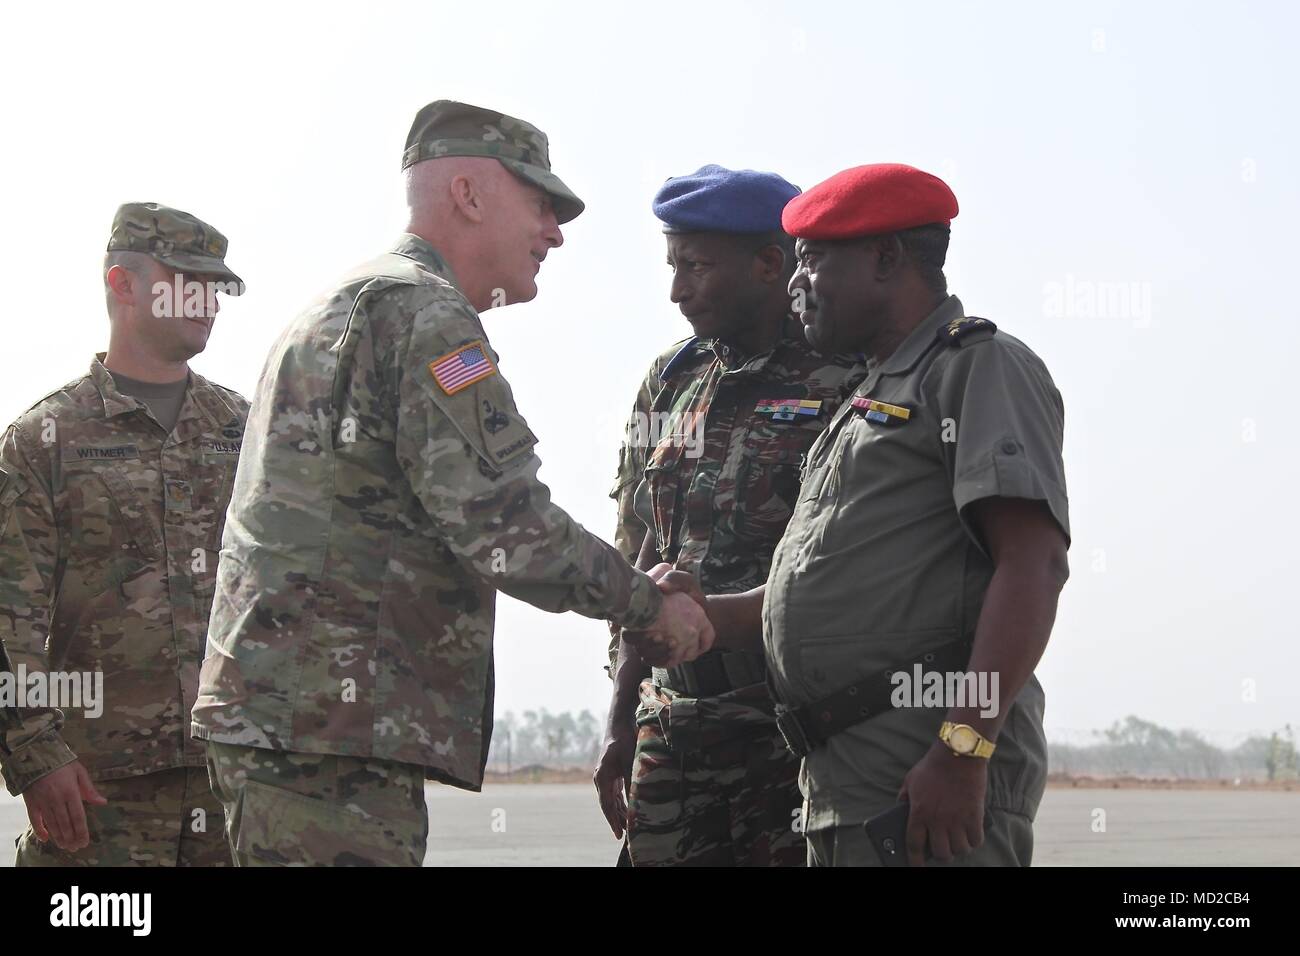 Brig. Gen. Eugene J. LeBoeuf, acting commanding general for U.S. Army Africa, visits Task Force Darby at Contingency Location Garoua, Cameroon March 15, 2018. Upon arrival, LeBoeuf shakes hands with Brigadier General Ekonguese of the Cameroonian Military on his way to the Garoua Regional Hospital for a USARAF medical exercise. TF Darby serve members at CL Garoua, are serving in a support role for the Cameroonian Military’s fight against the violent extremist organization Boko Haram. Stock Photo